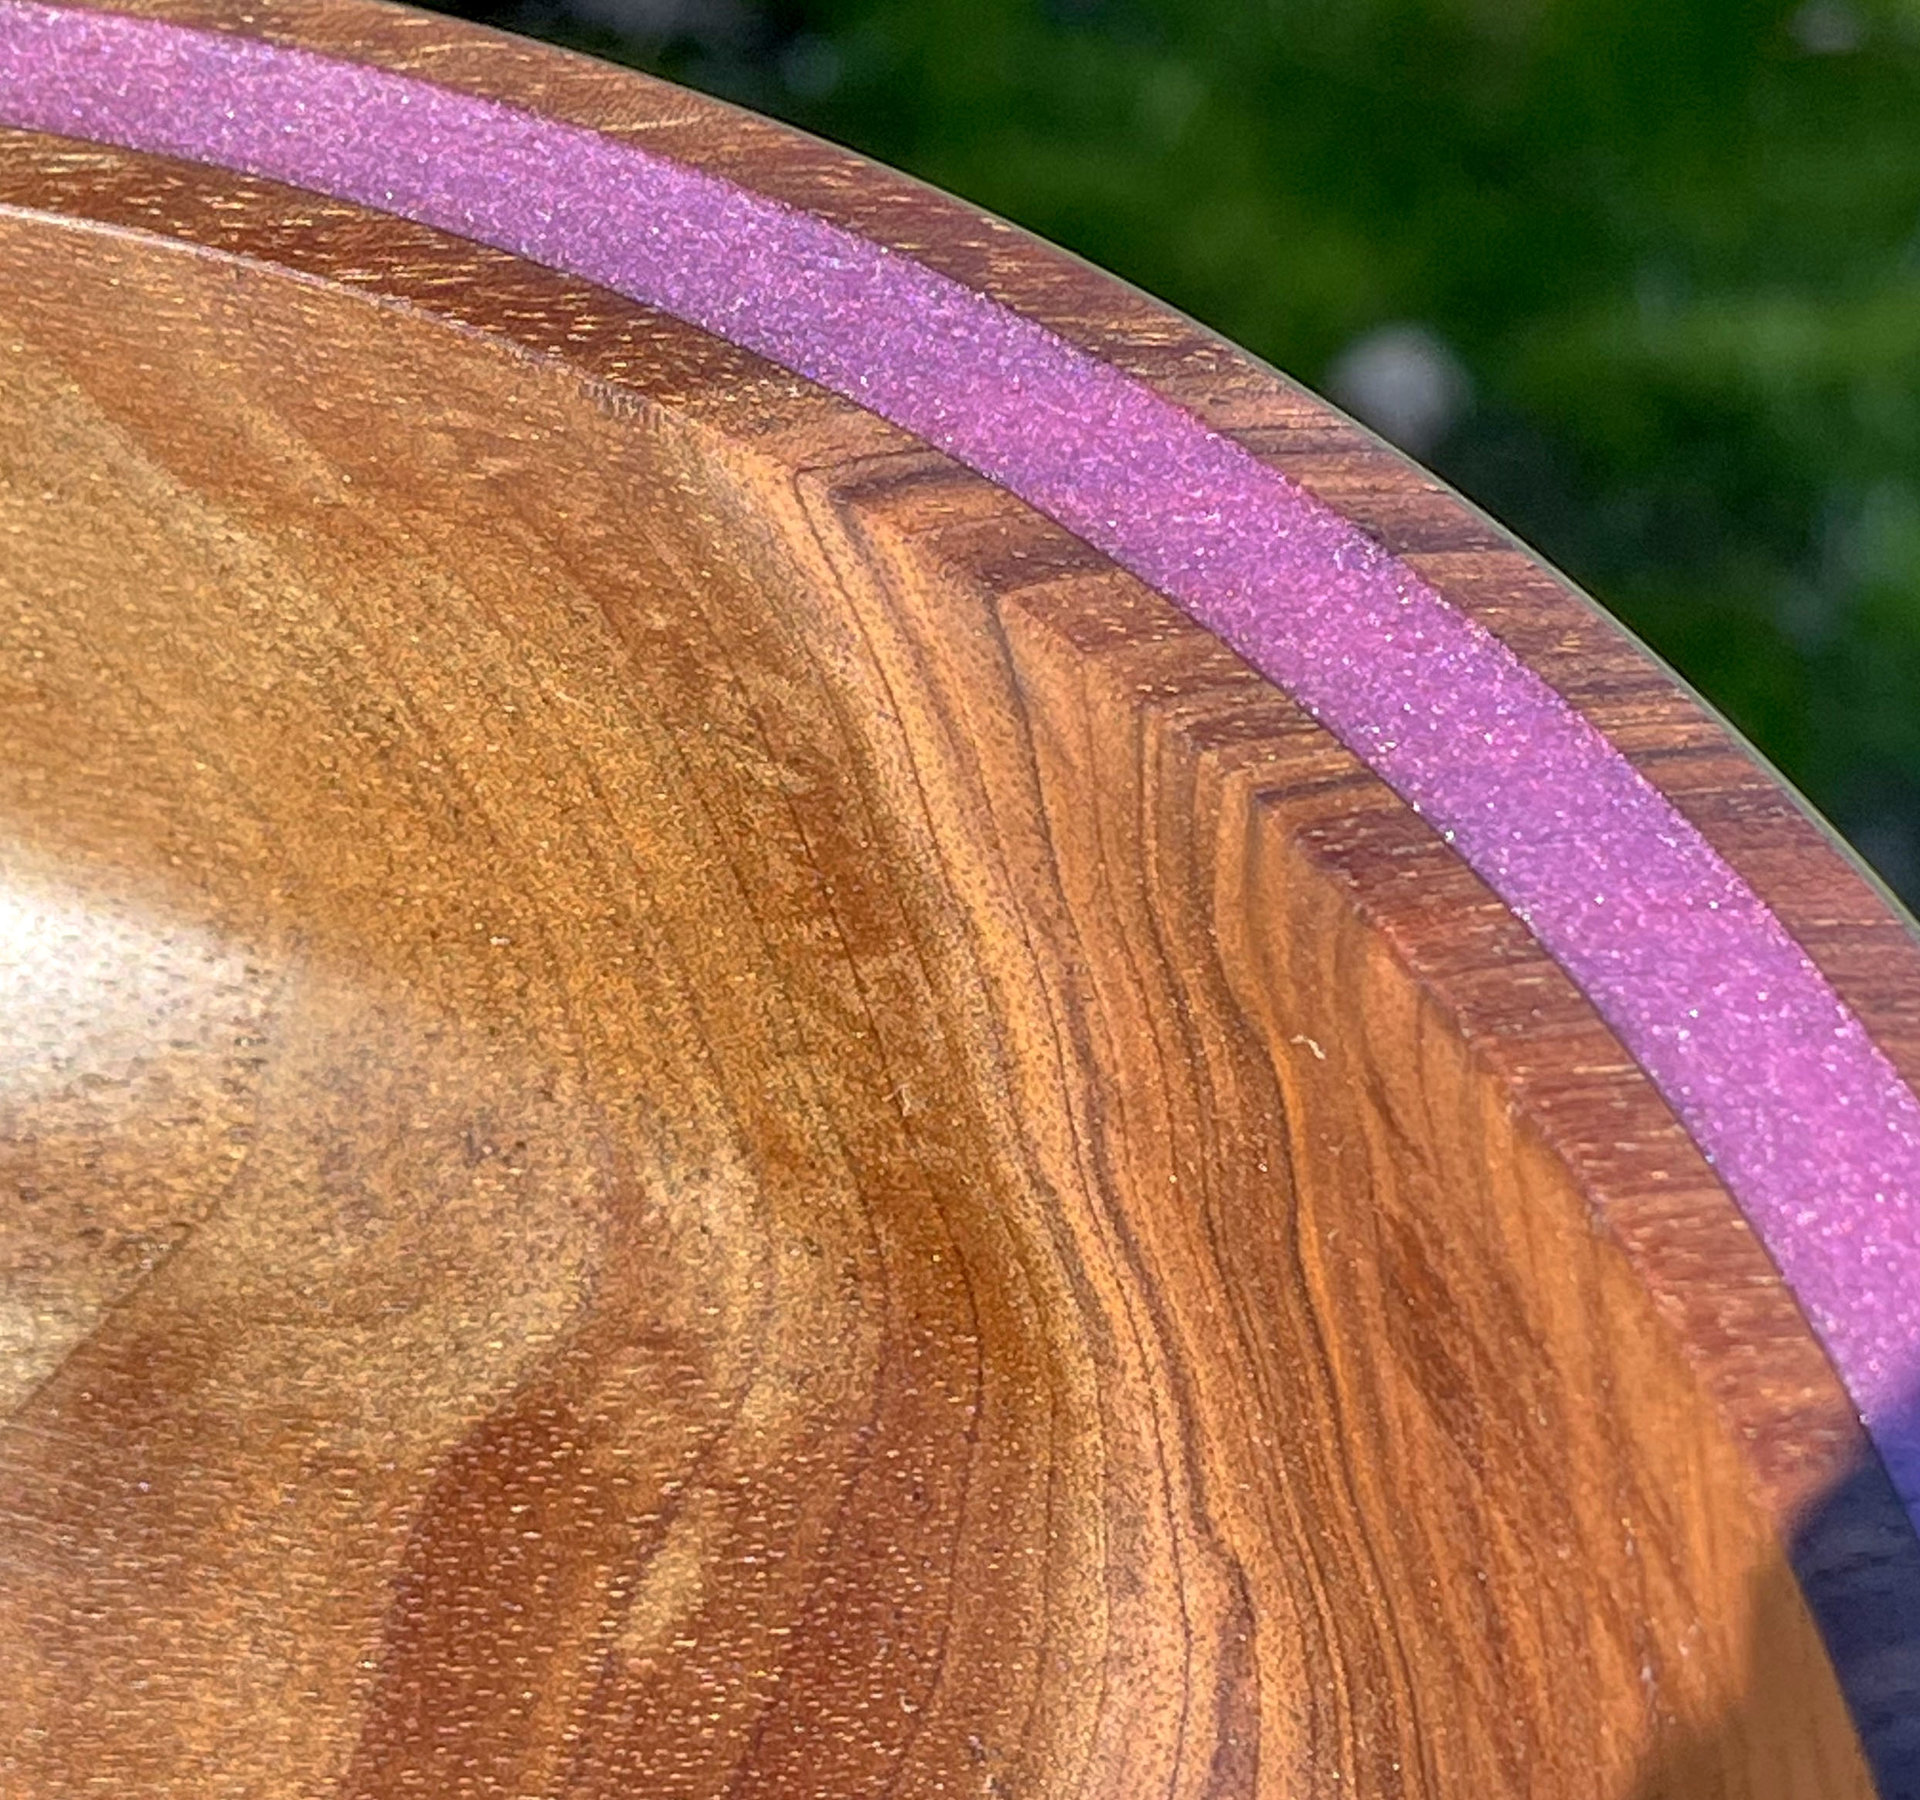 Walnut bowl for friend with cancer